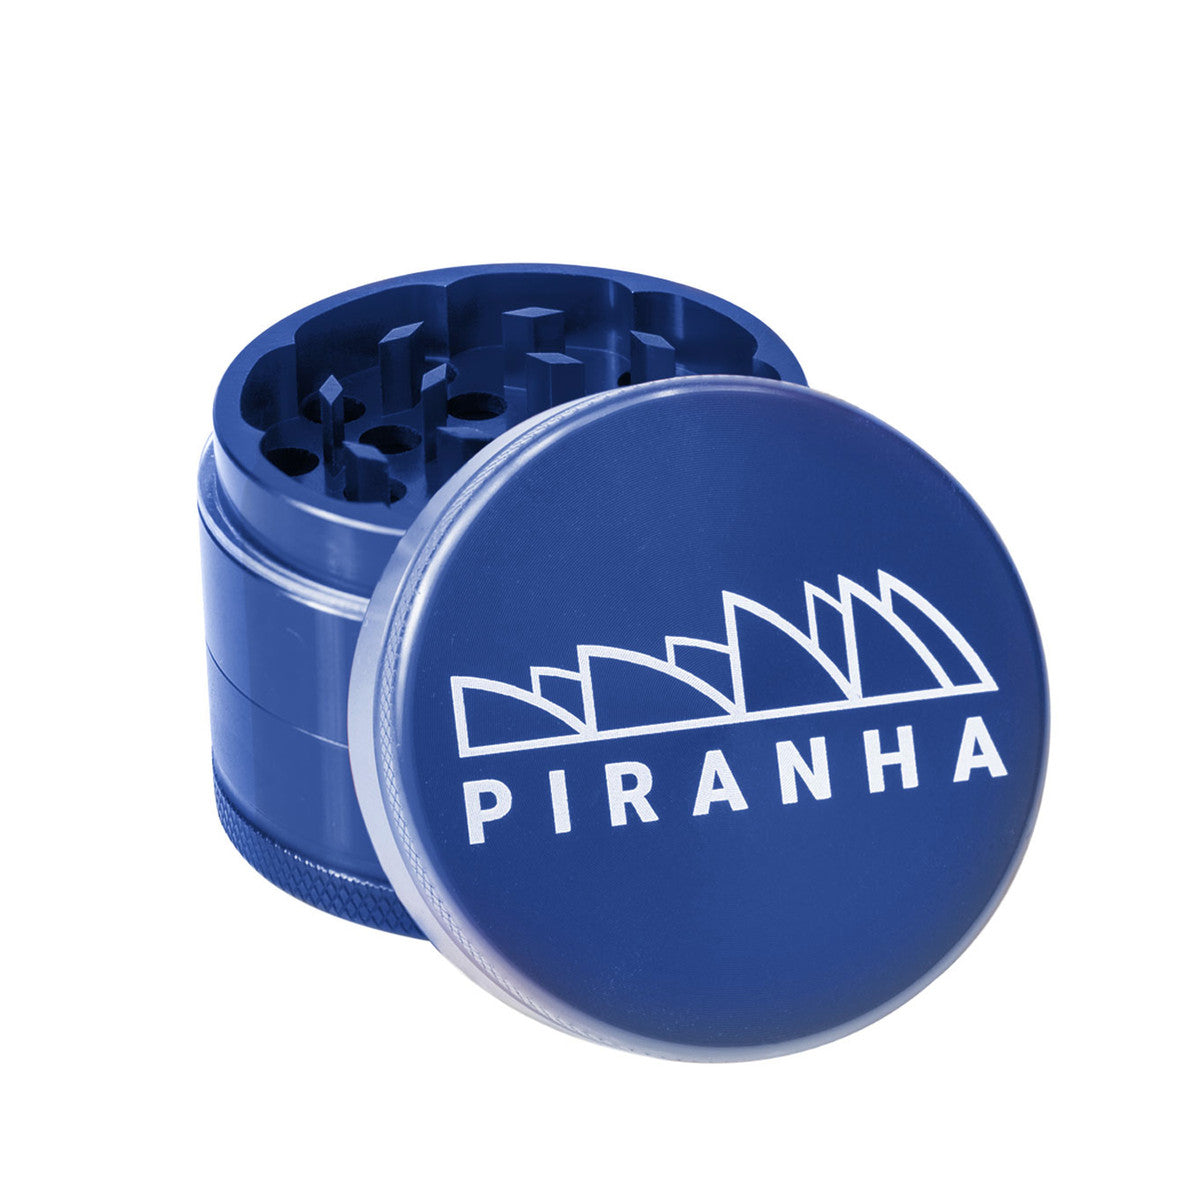 Shred and store your herbs with these amazing 3-piece grinders from Piranha. Offering high level performance for grinding dry herbs with ease, Piranha is a compact and durable marvel. The 3 piece offers storage space for excess cannabis, razor sharp teeth, a durable anodized aluminum body, and a powerful magnetic lid. The perfect companion for any smoker.